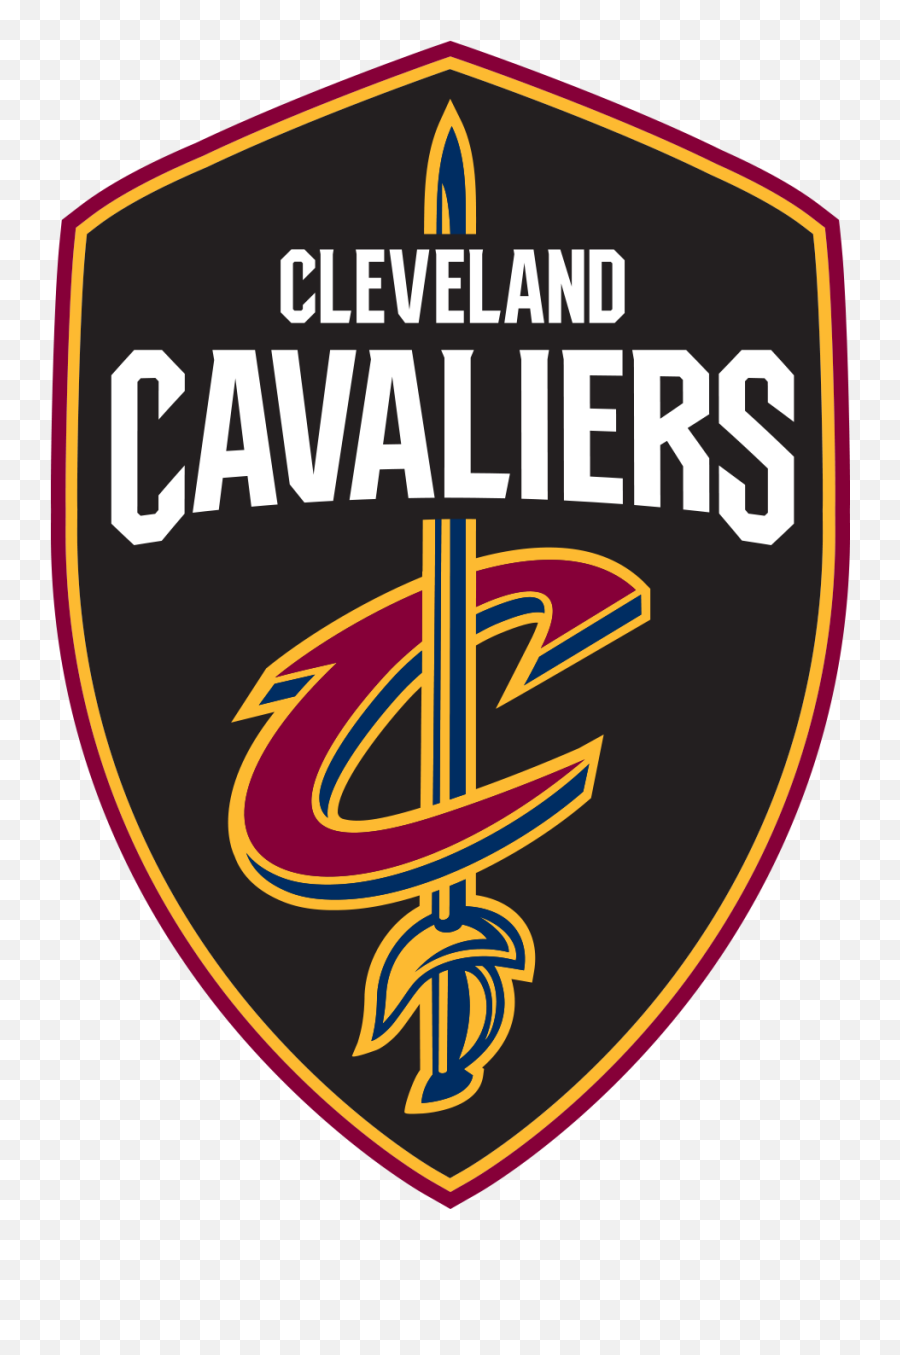 The Goodyear Brand - More Driven Goodyear Tires Cleveland Cavaliers Logo 2020 Png,Good Year Logo